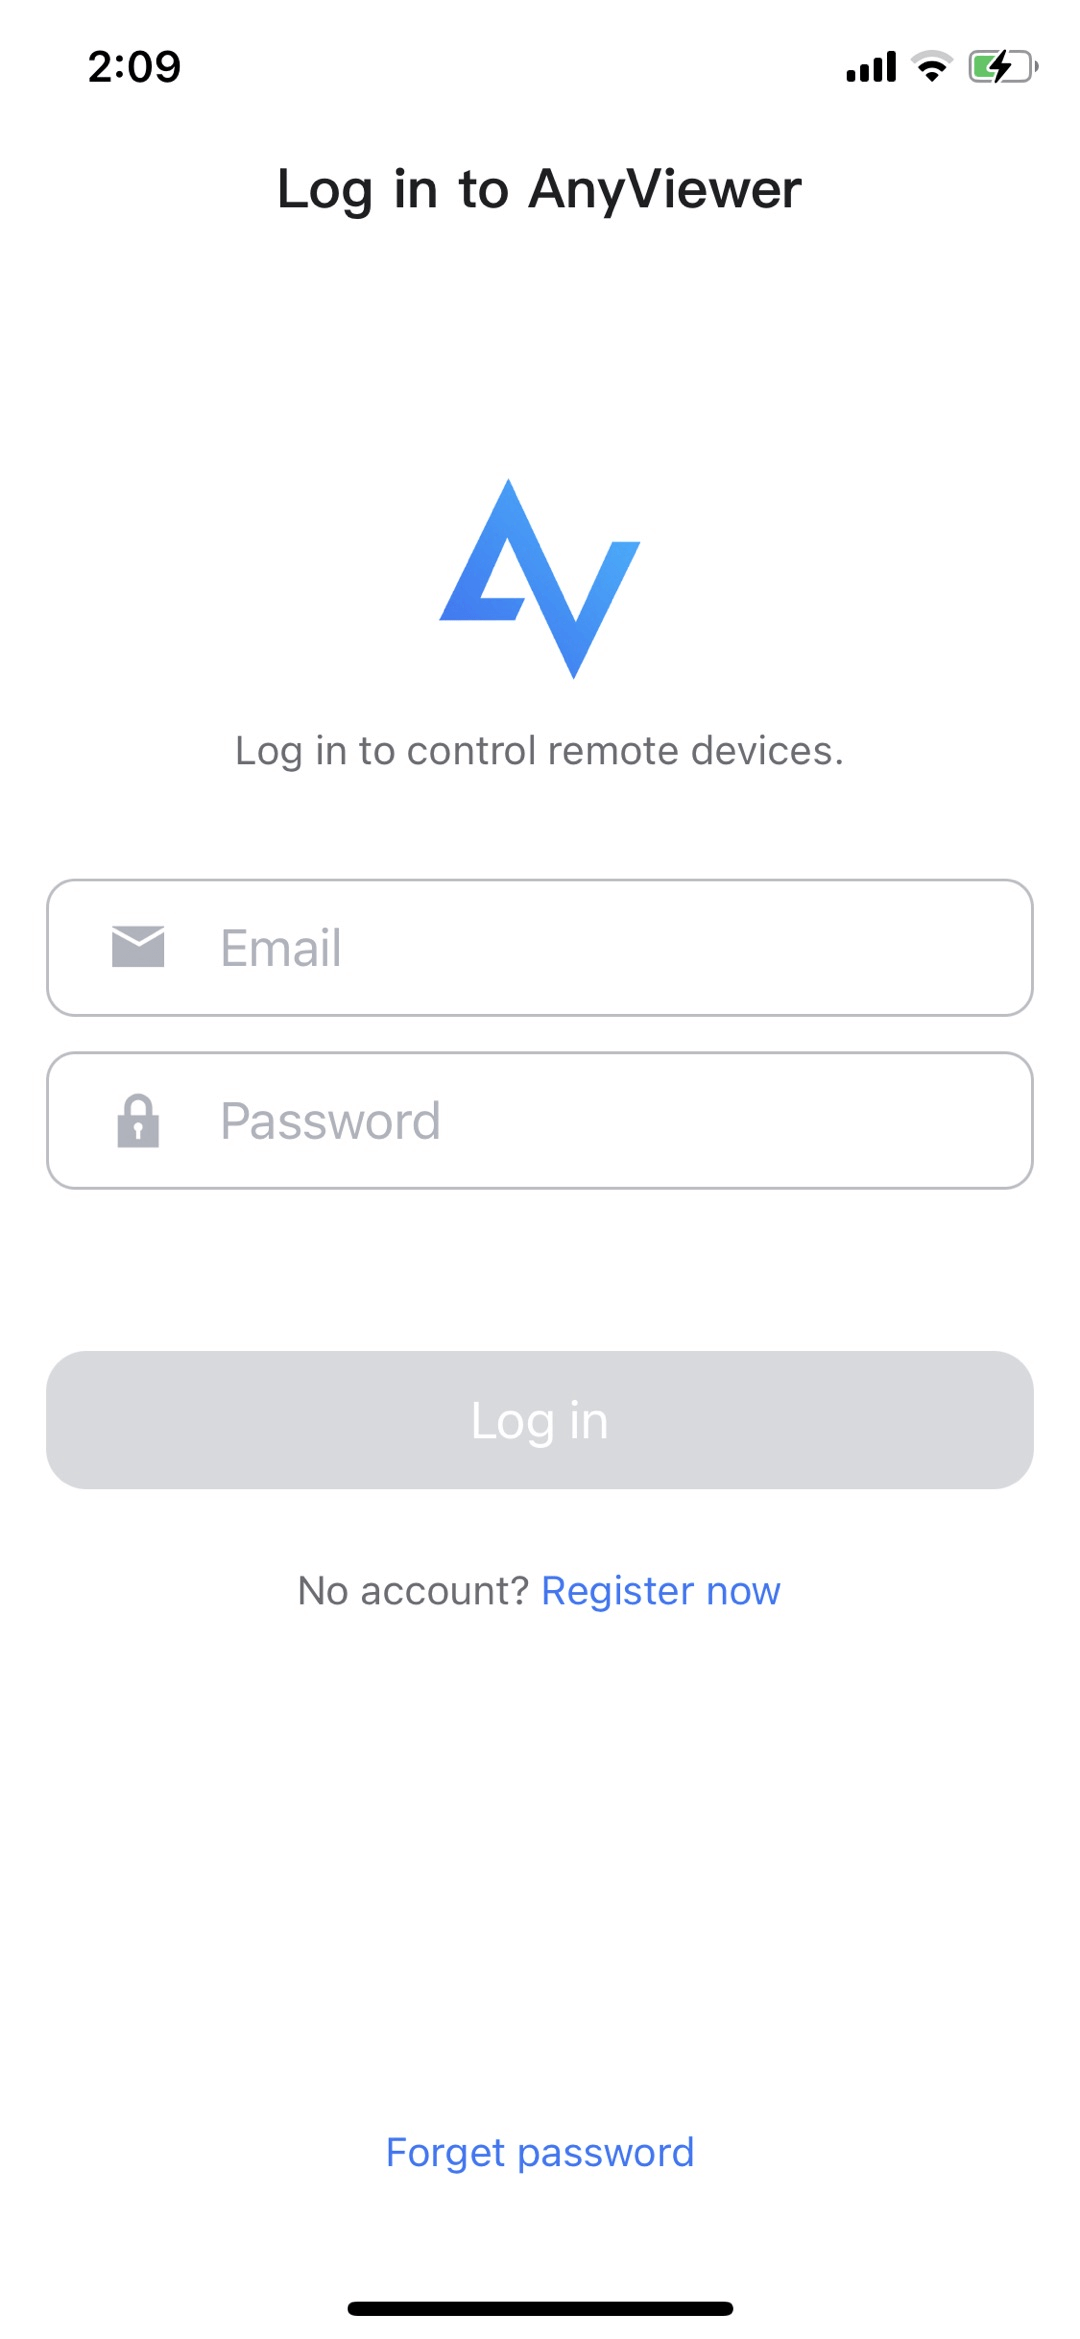 Log in to AnyViewer iOS